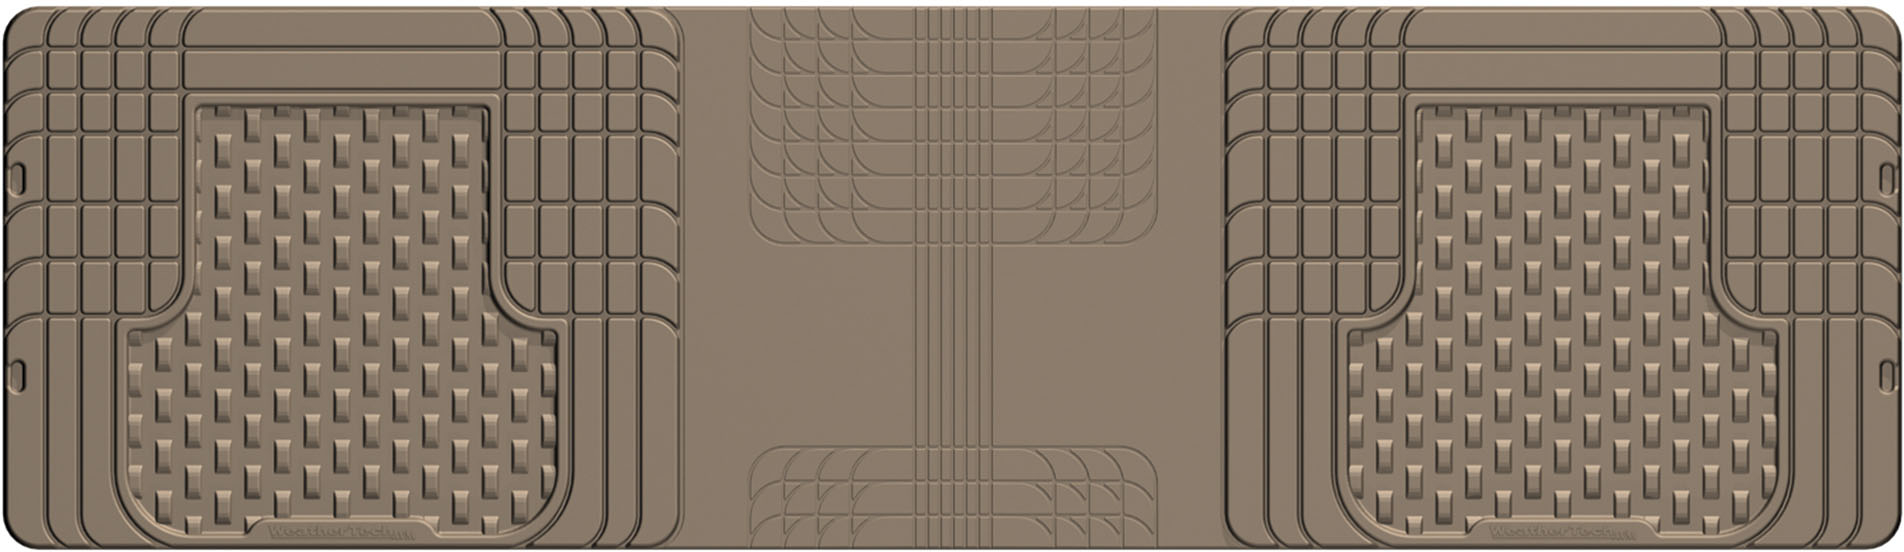 WeatherTech IndoorMat - for Home and Business (30x60, Tan)